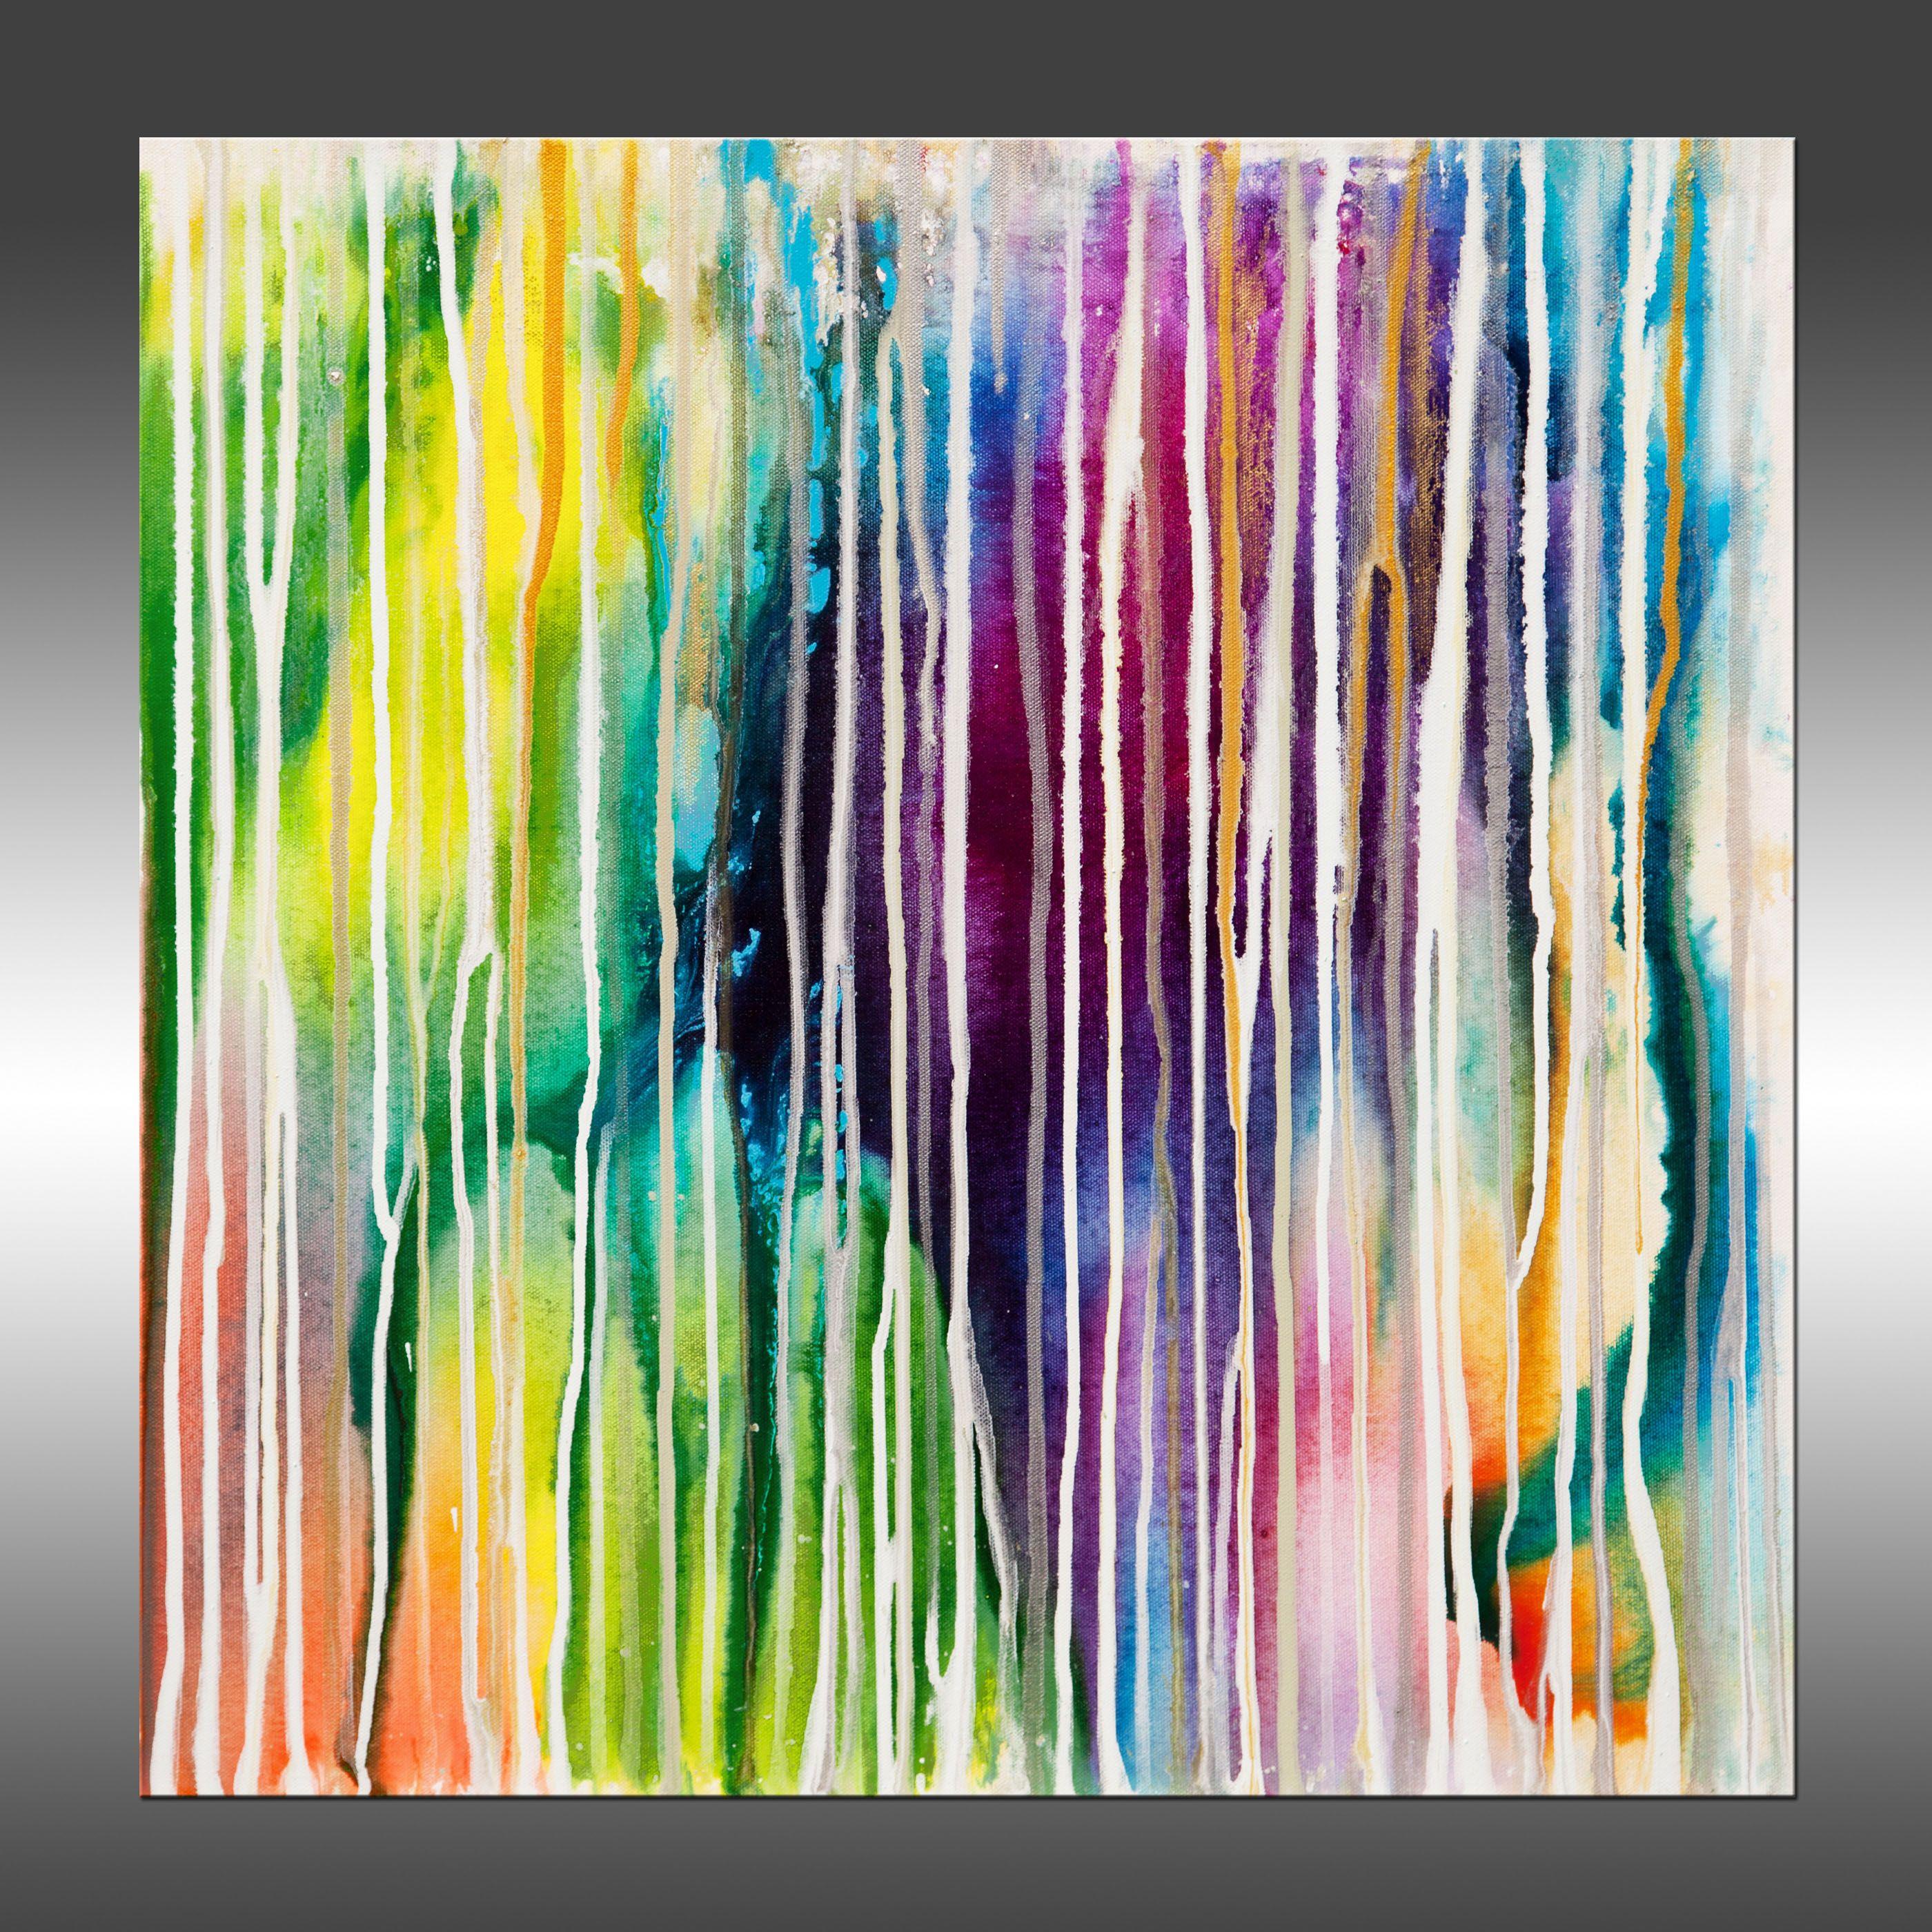 Underwater Magic 6 is an original painting, created with acrylic paint on gallery-wrapped canvas. It has a width of 24 inches and a height of 24 inches with a depth of 1.5 inches (24x24x1.5).    The colors used in the painting are white, teal, blue,